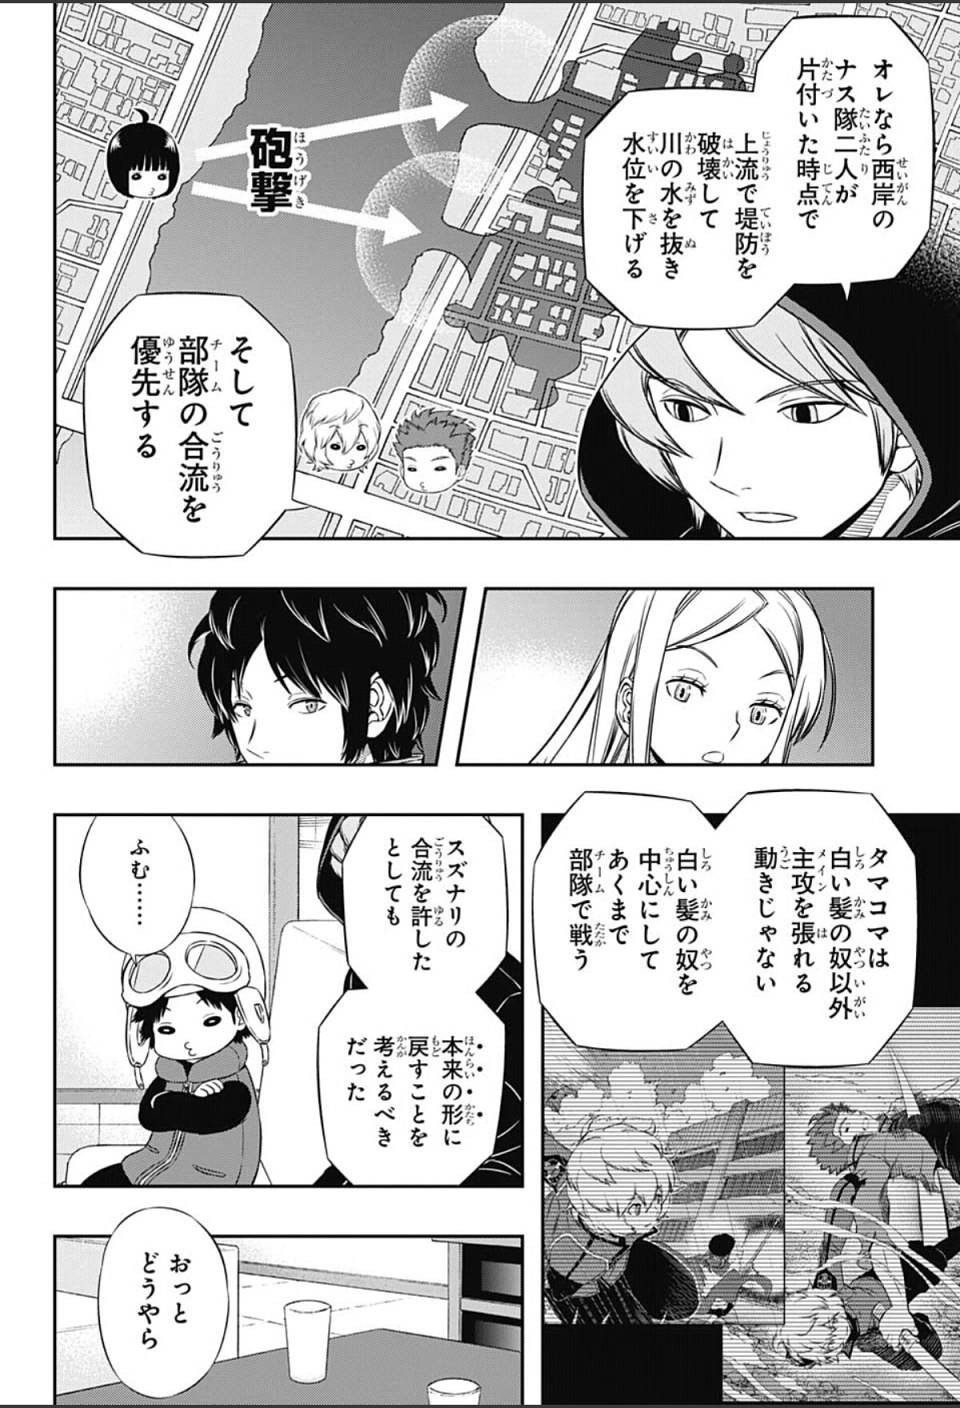 World Trigger - Chapter 102 - Page 6